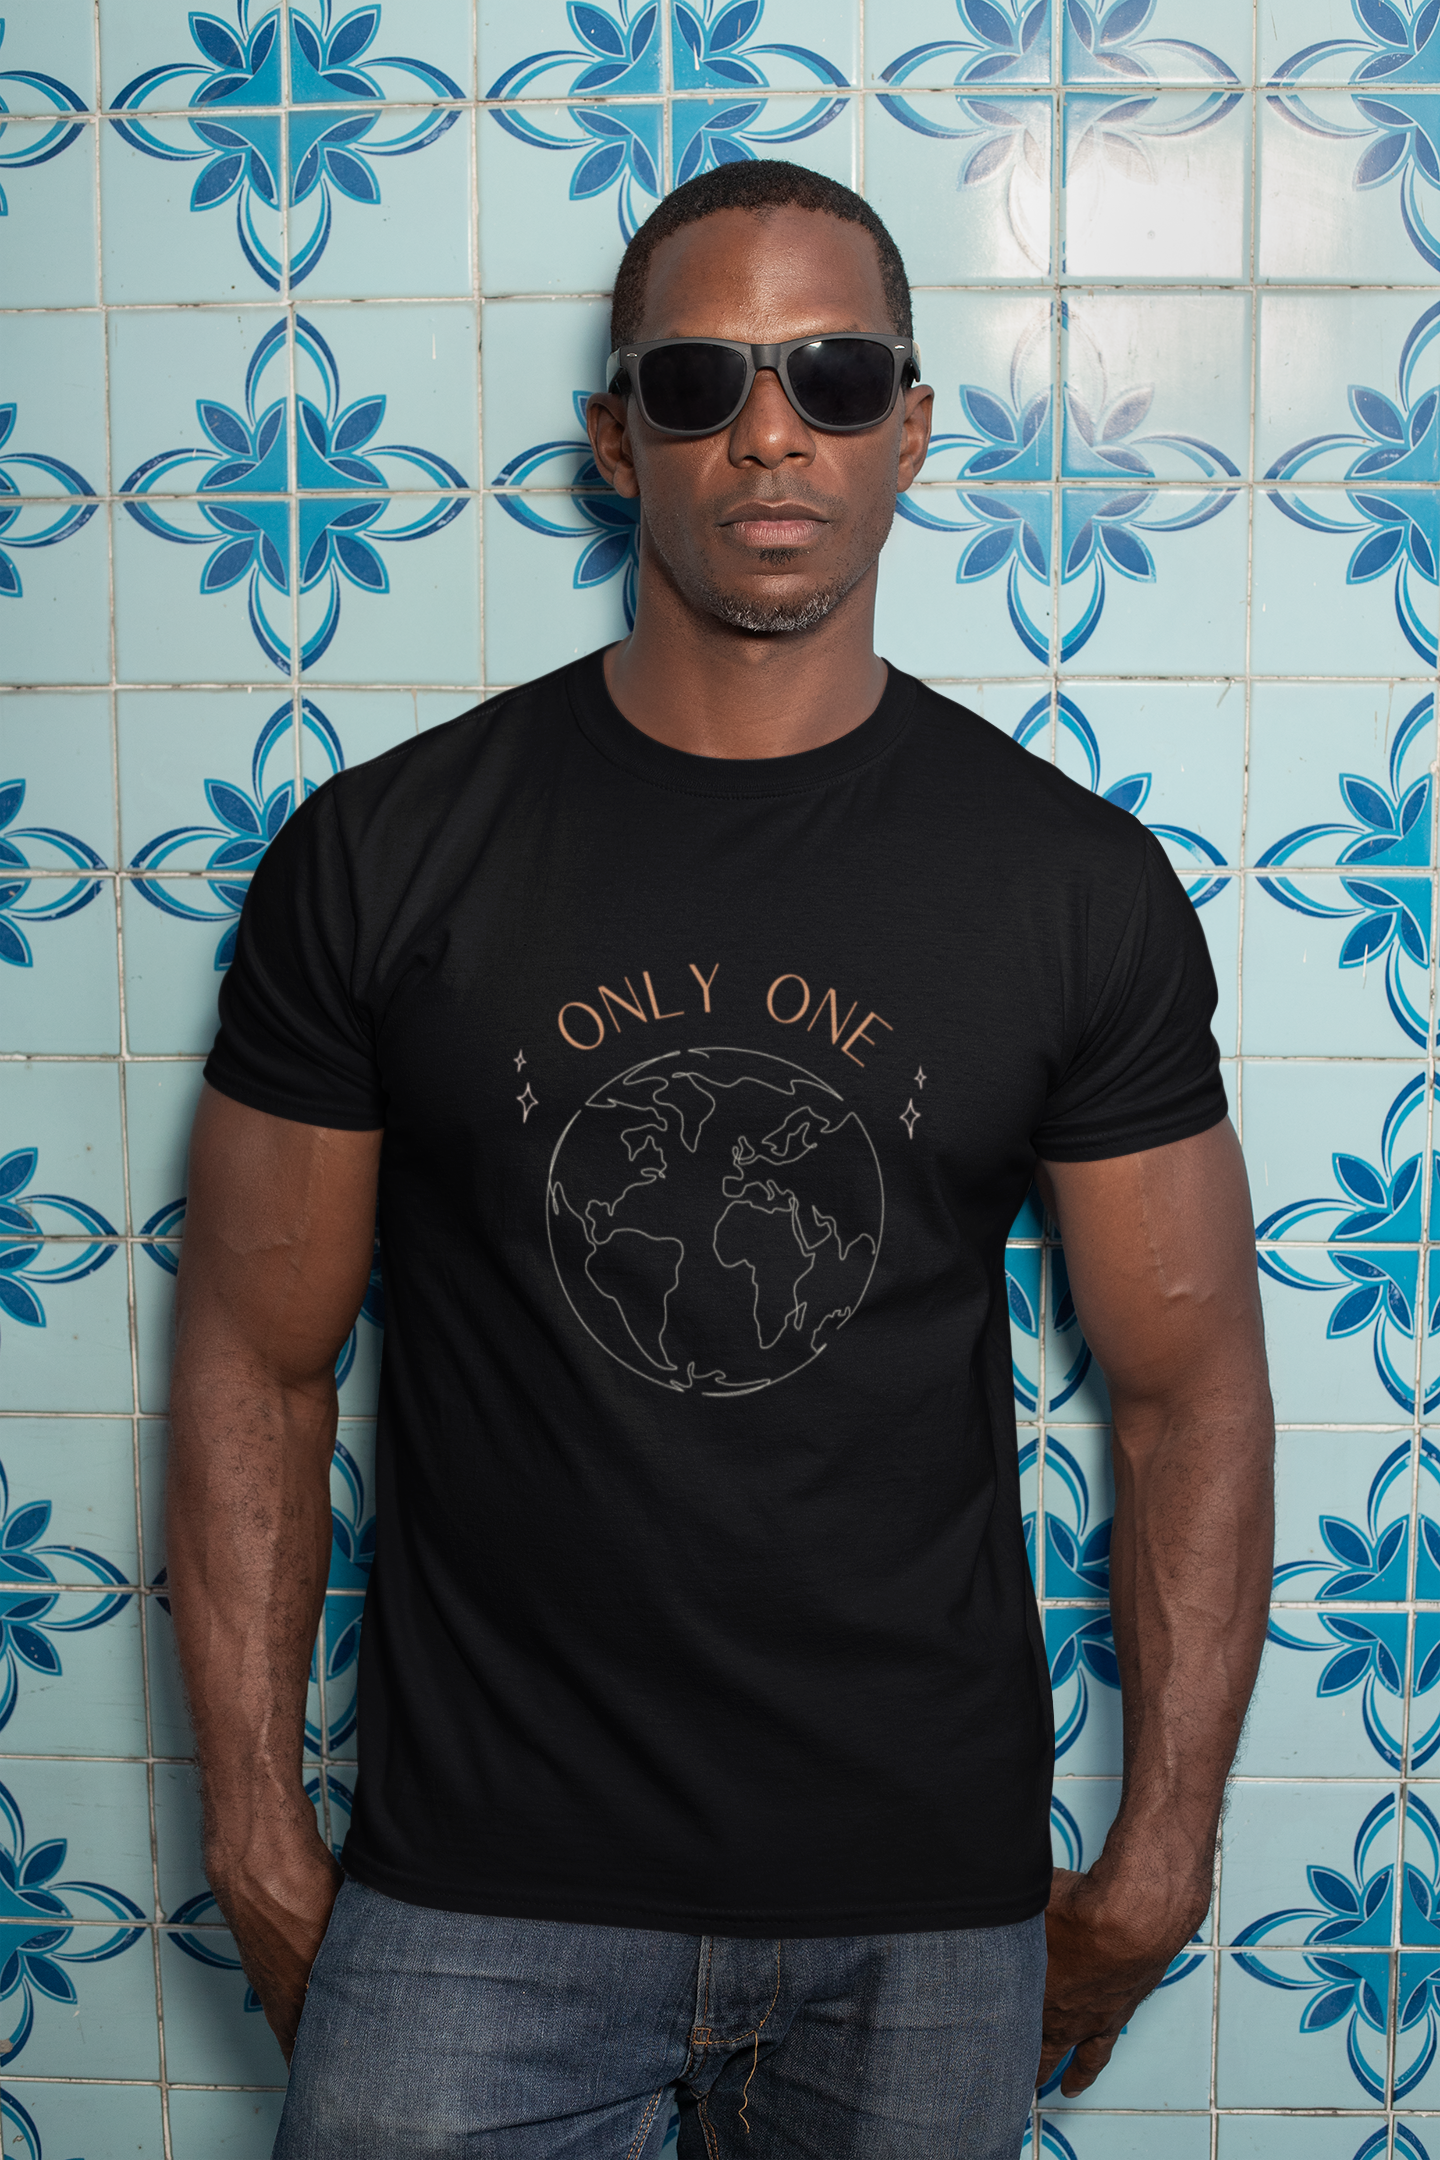 man with sunglasses against a vibrant tile wall wearing an organic vegan t-shirt saying only one earth